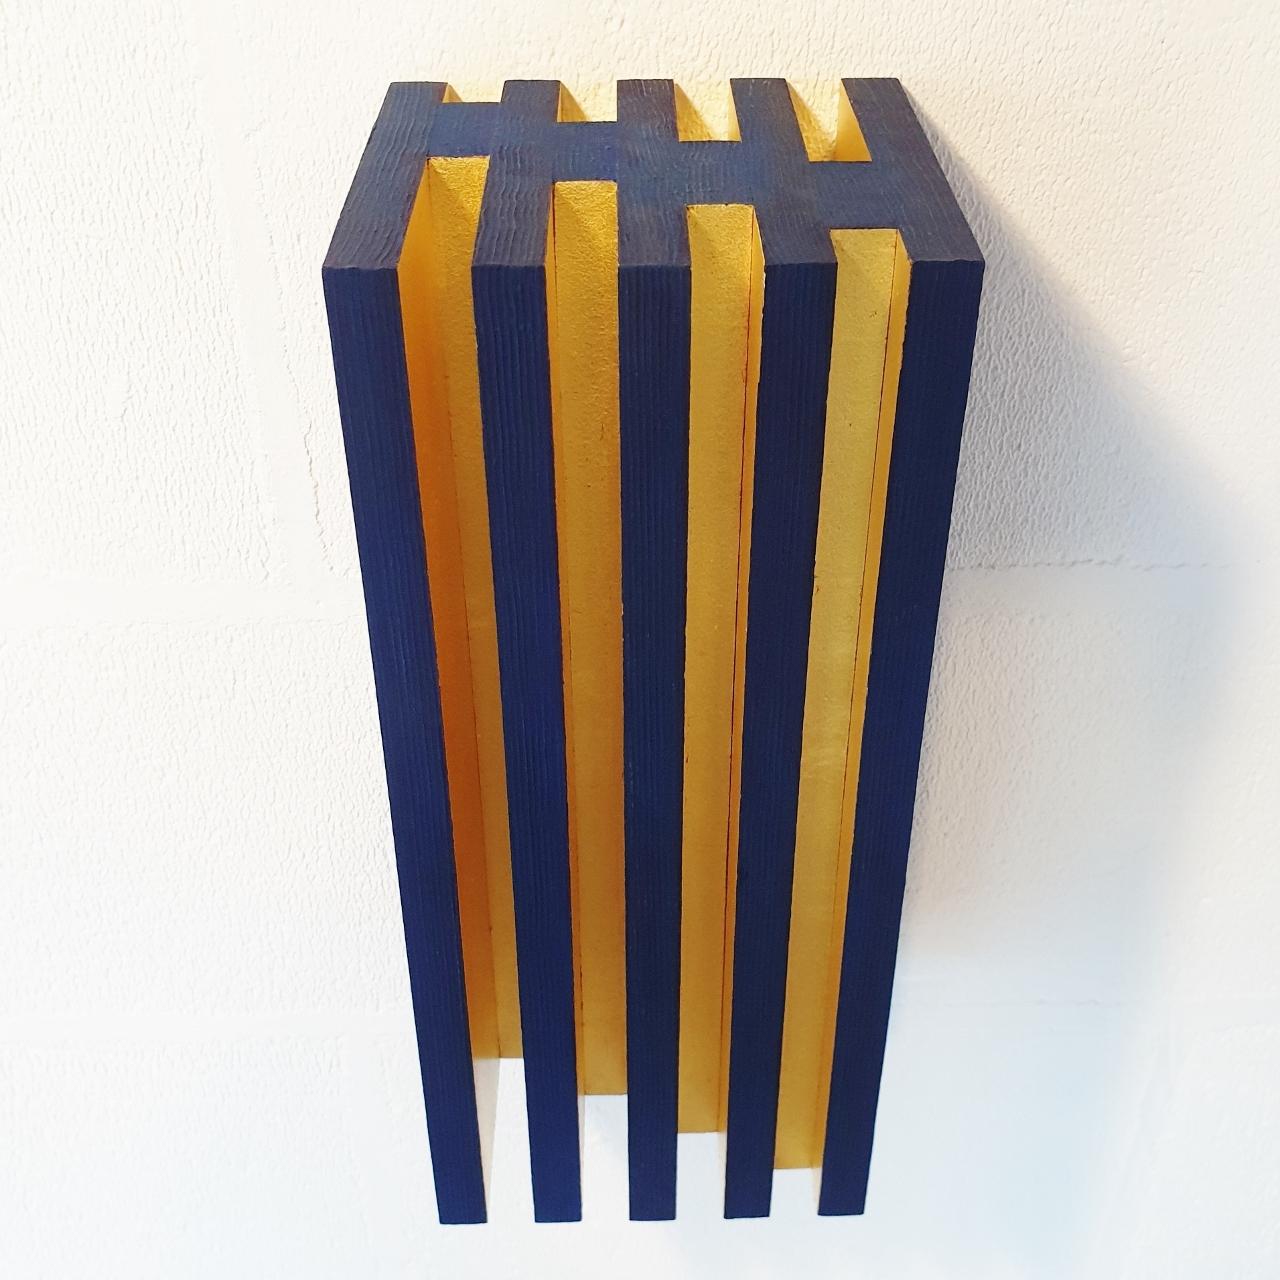 Luminosité verticale is a unique medium size contemporary modern sculpture painting relief by French-Dutch artist Olivier Julia. The relief is made from blue-painted textured wood with gold leaf and is part of his explorations of panel type